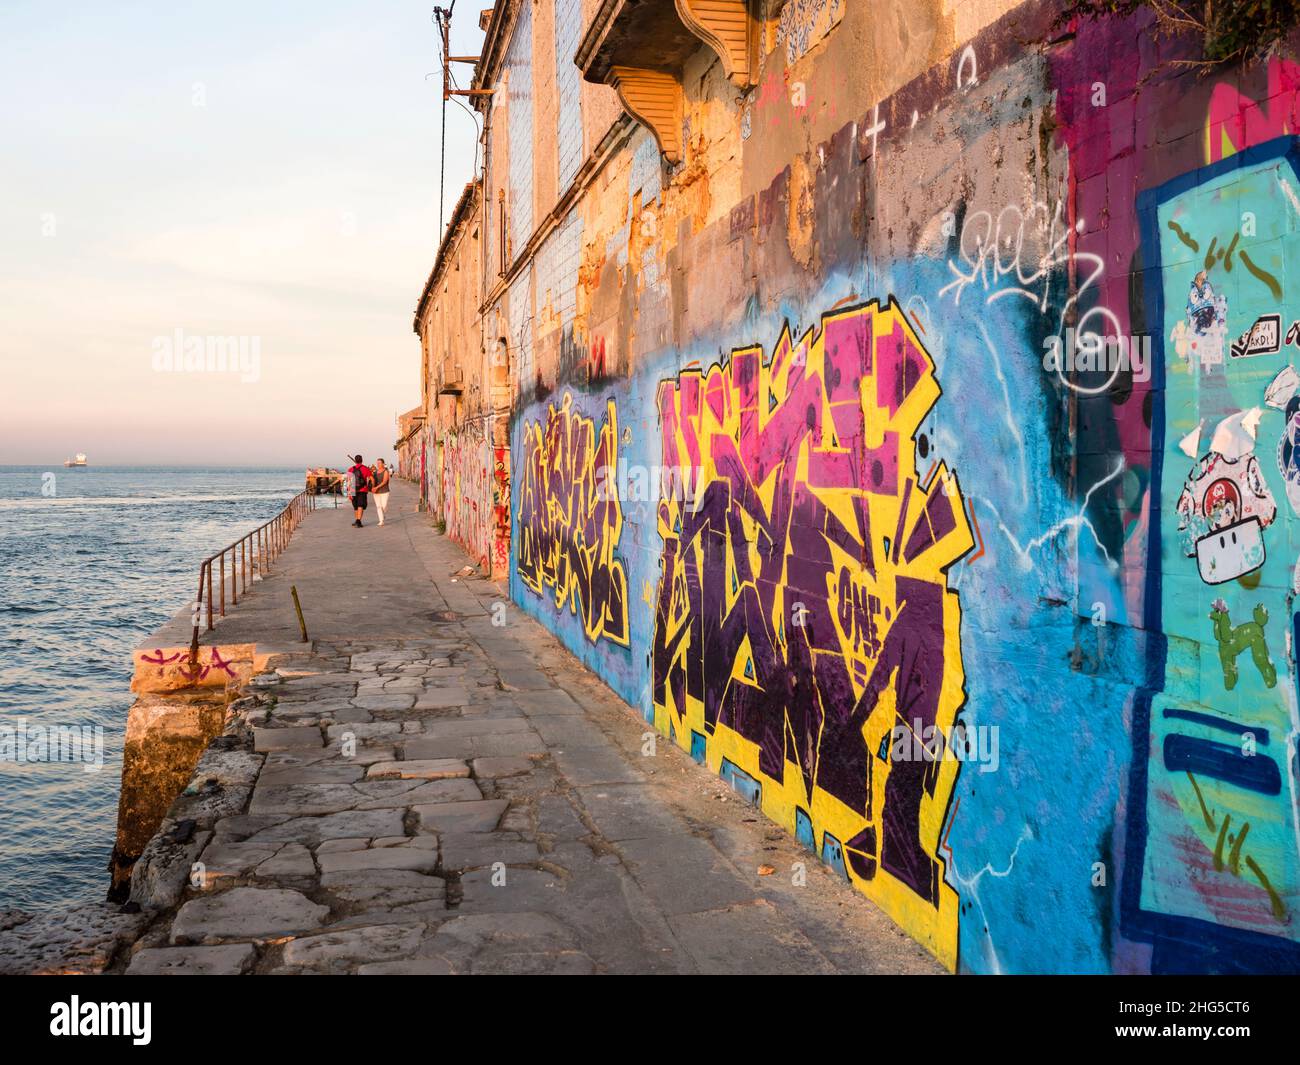 Lisbon, Portugal - 18 October 2021: Graffiti and murals in the evening twilight on abandoned buildings at Lisbon's Almada district at the waterfront o Stock Photo